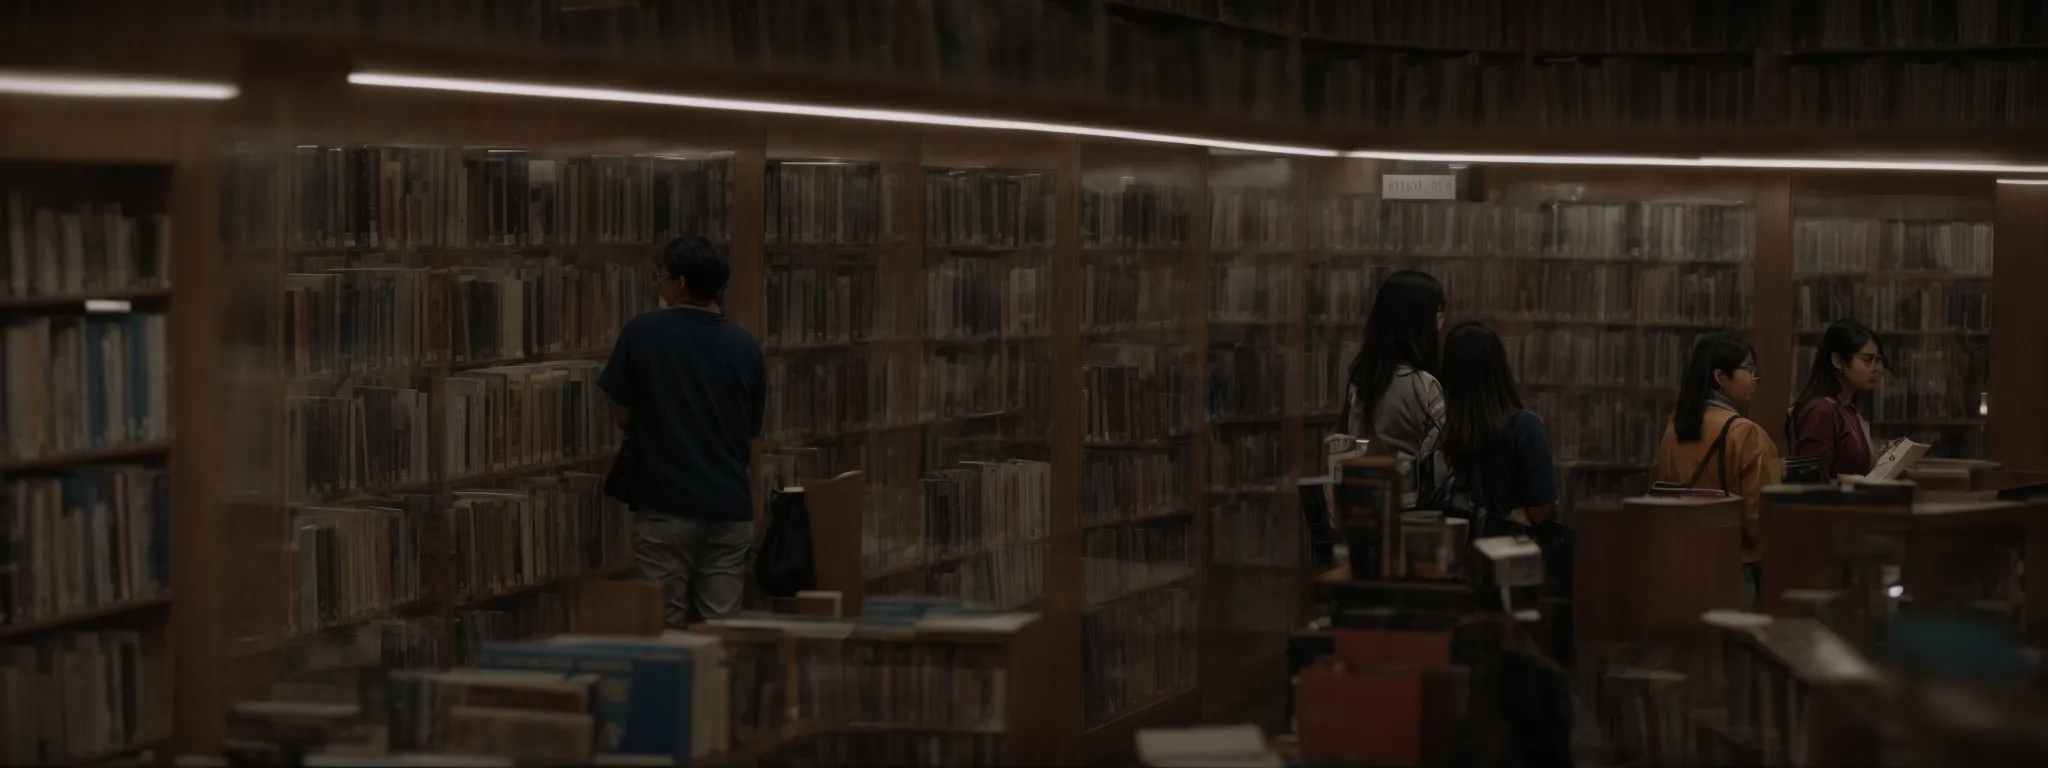 a library with visitors browsing through shelves filled with thick books on diverse topics.